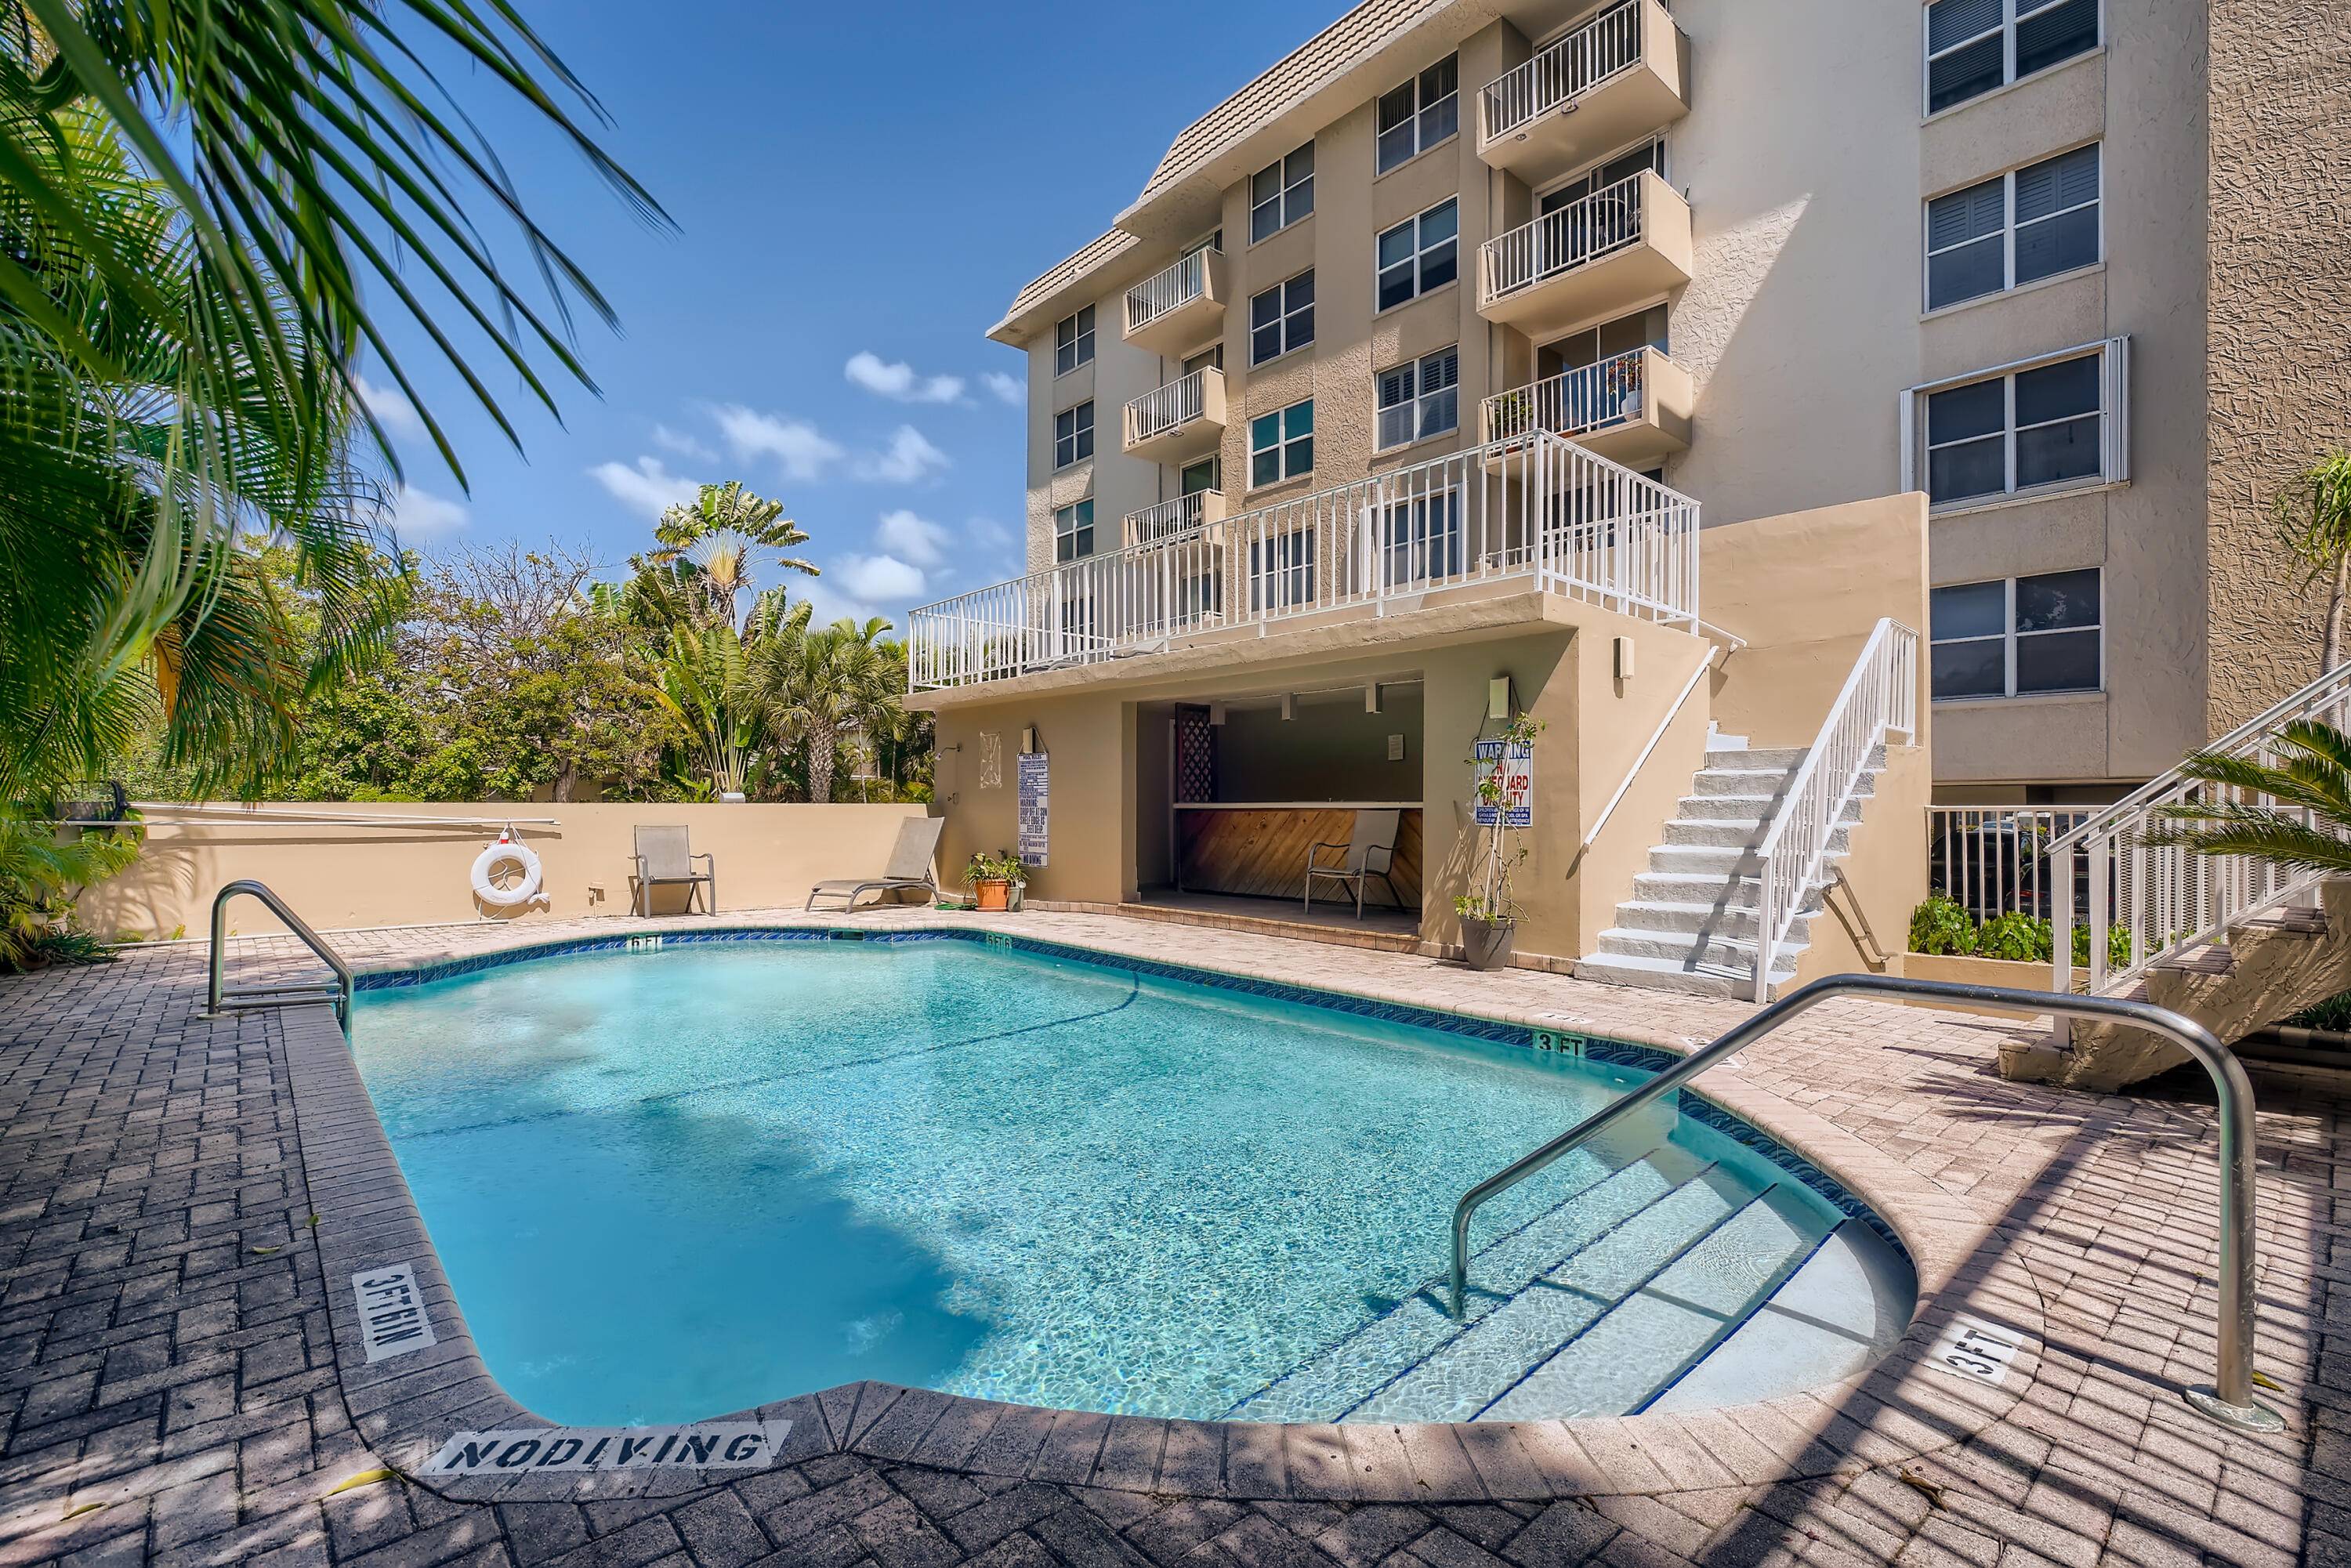 Perfectly positioned condo just minutes away from beaches, shopping, public transportation, dining, Fort Lauderdale Airport, Port Everglades, and all Ft Lauderdale has to offer.